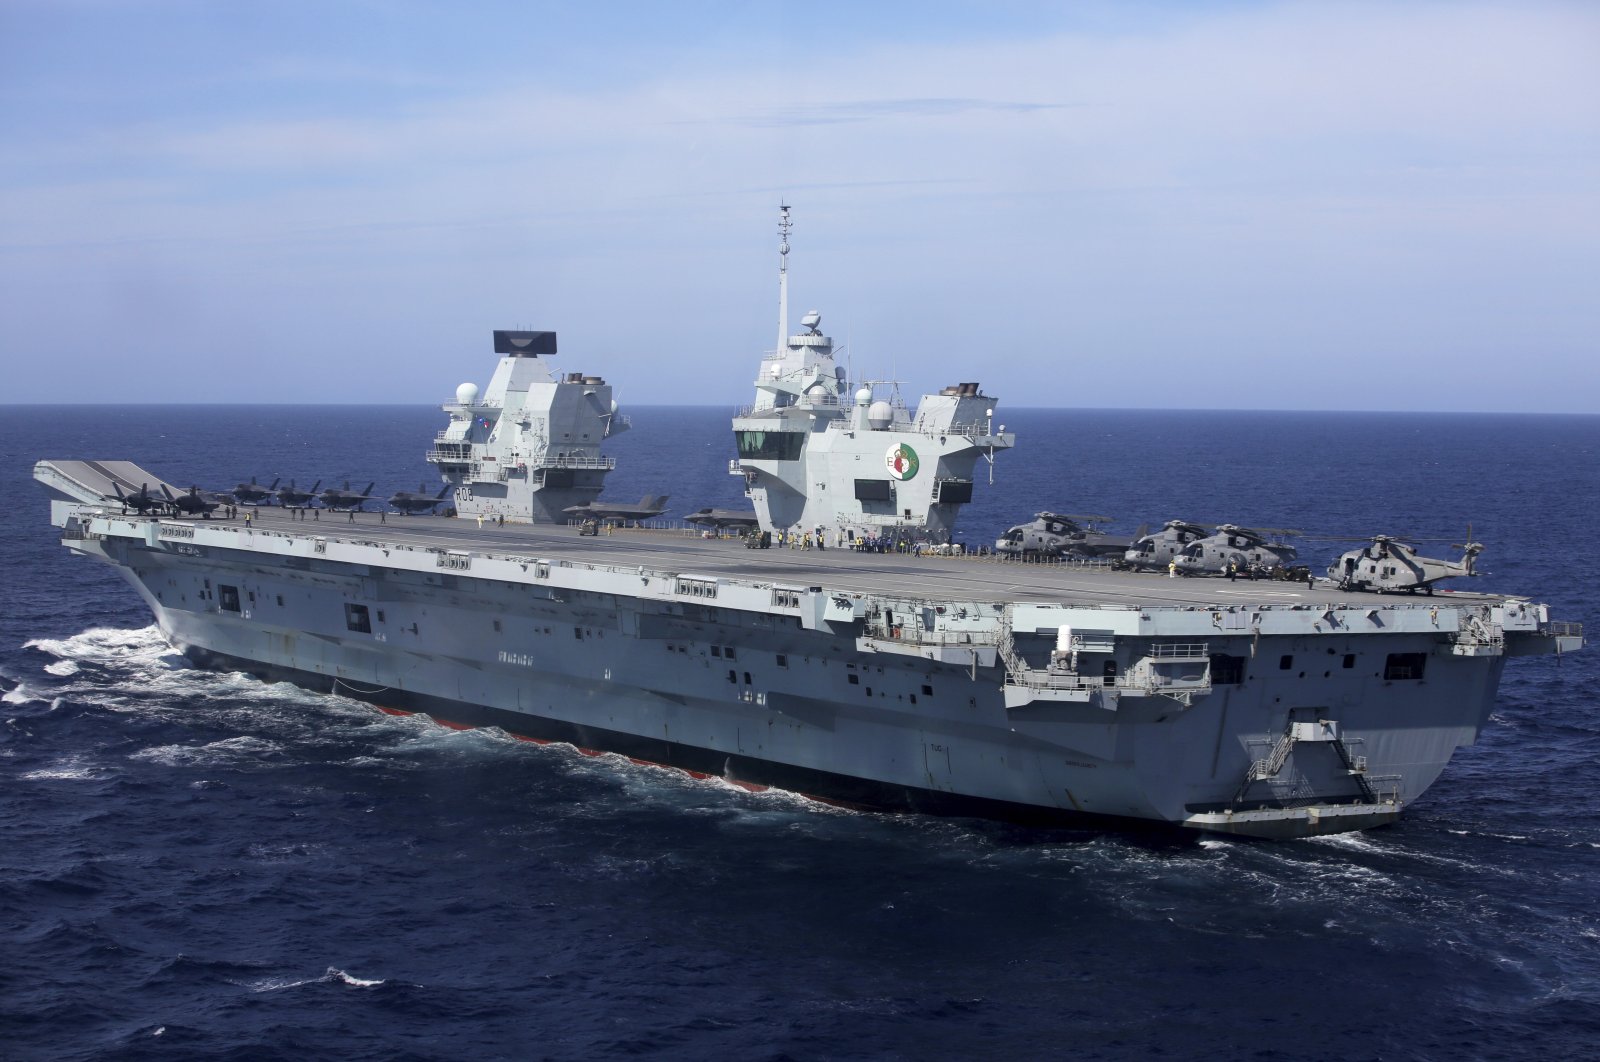 Military personnel participate in the training exercise NATO Steadfast Defender 2021 on board the aircraft carrier HMS Queen Elizabeth off the coast of Portugal, May 27, 2021. (AP Photo)